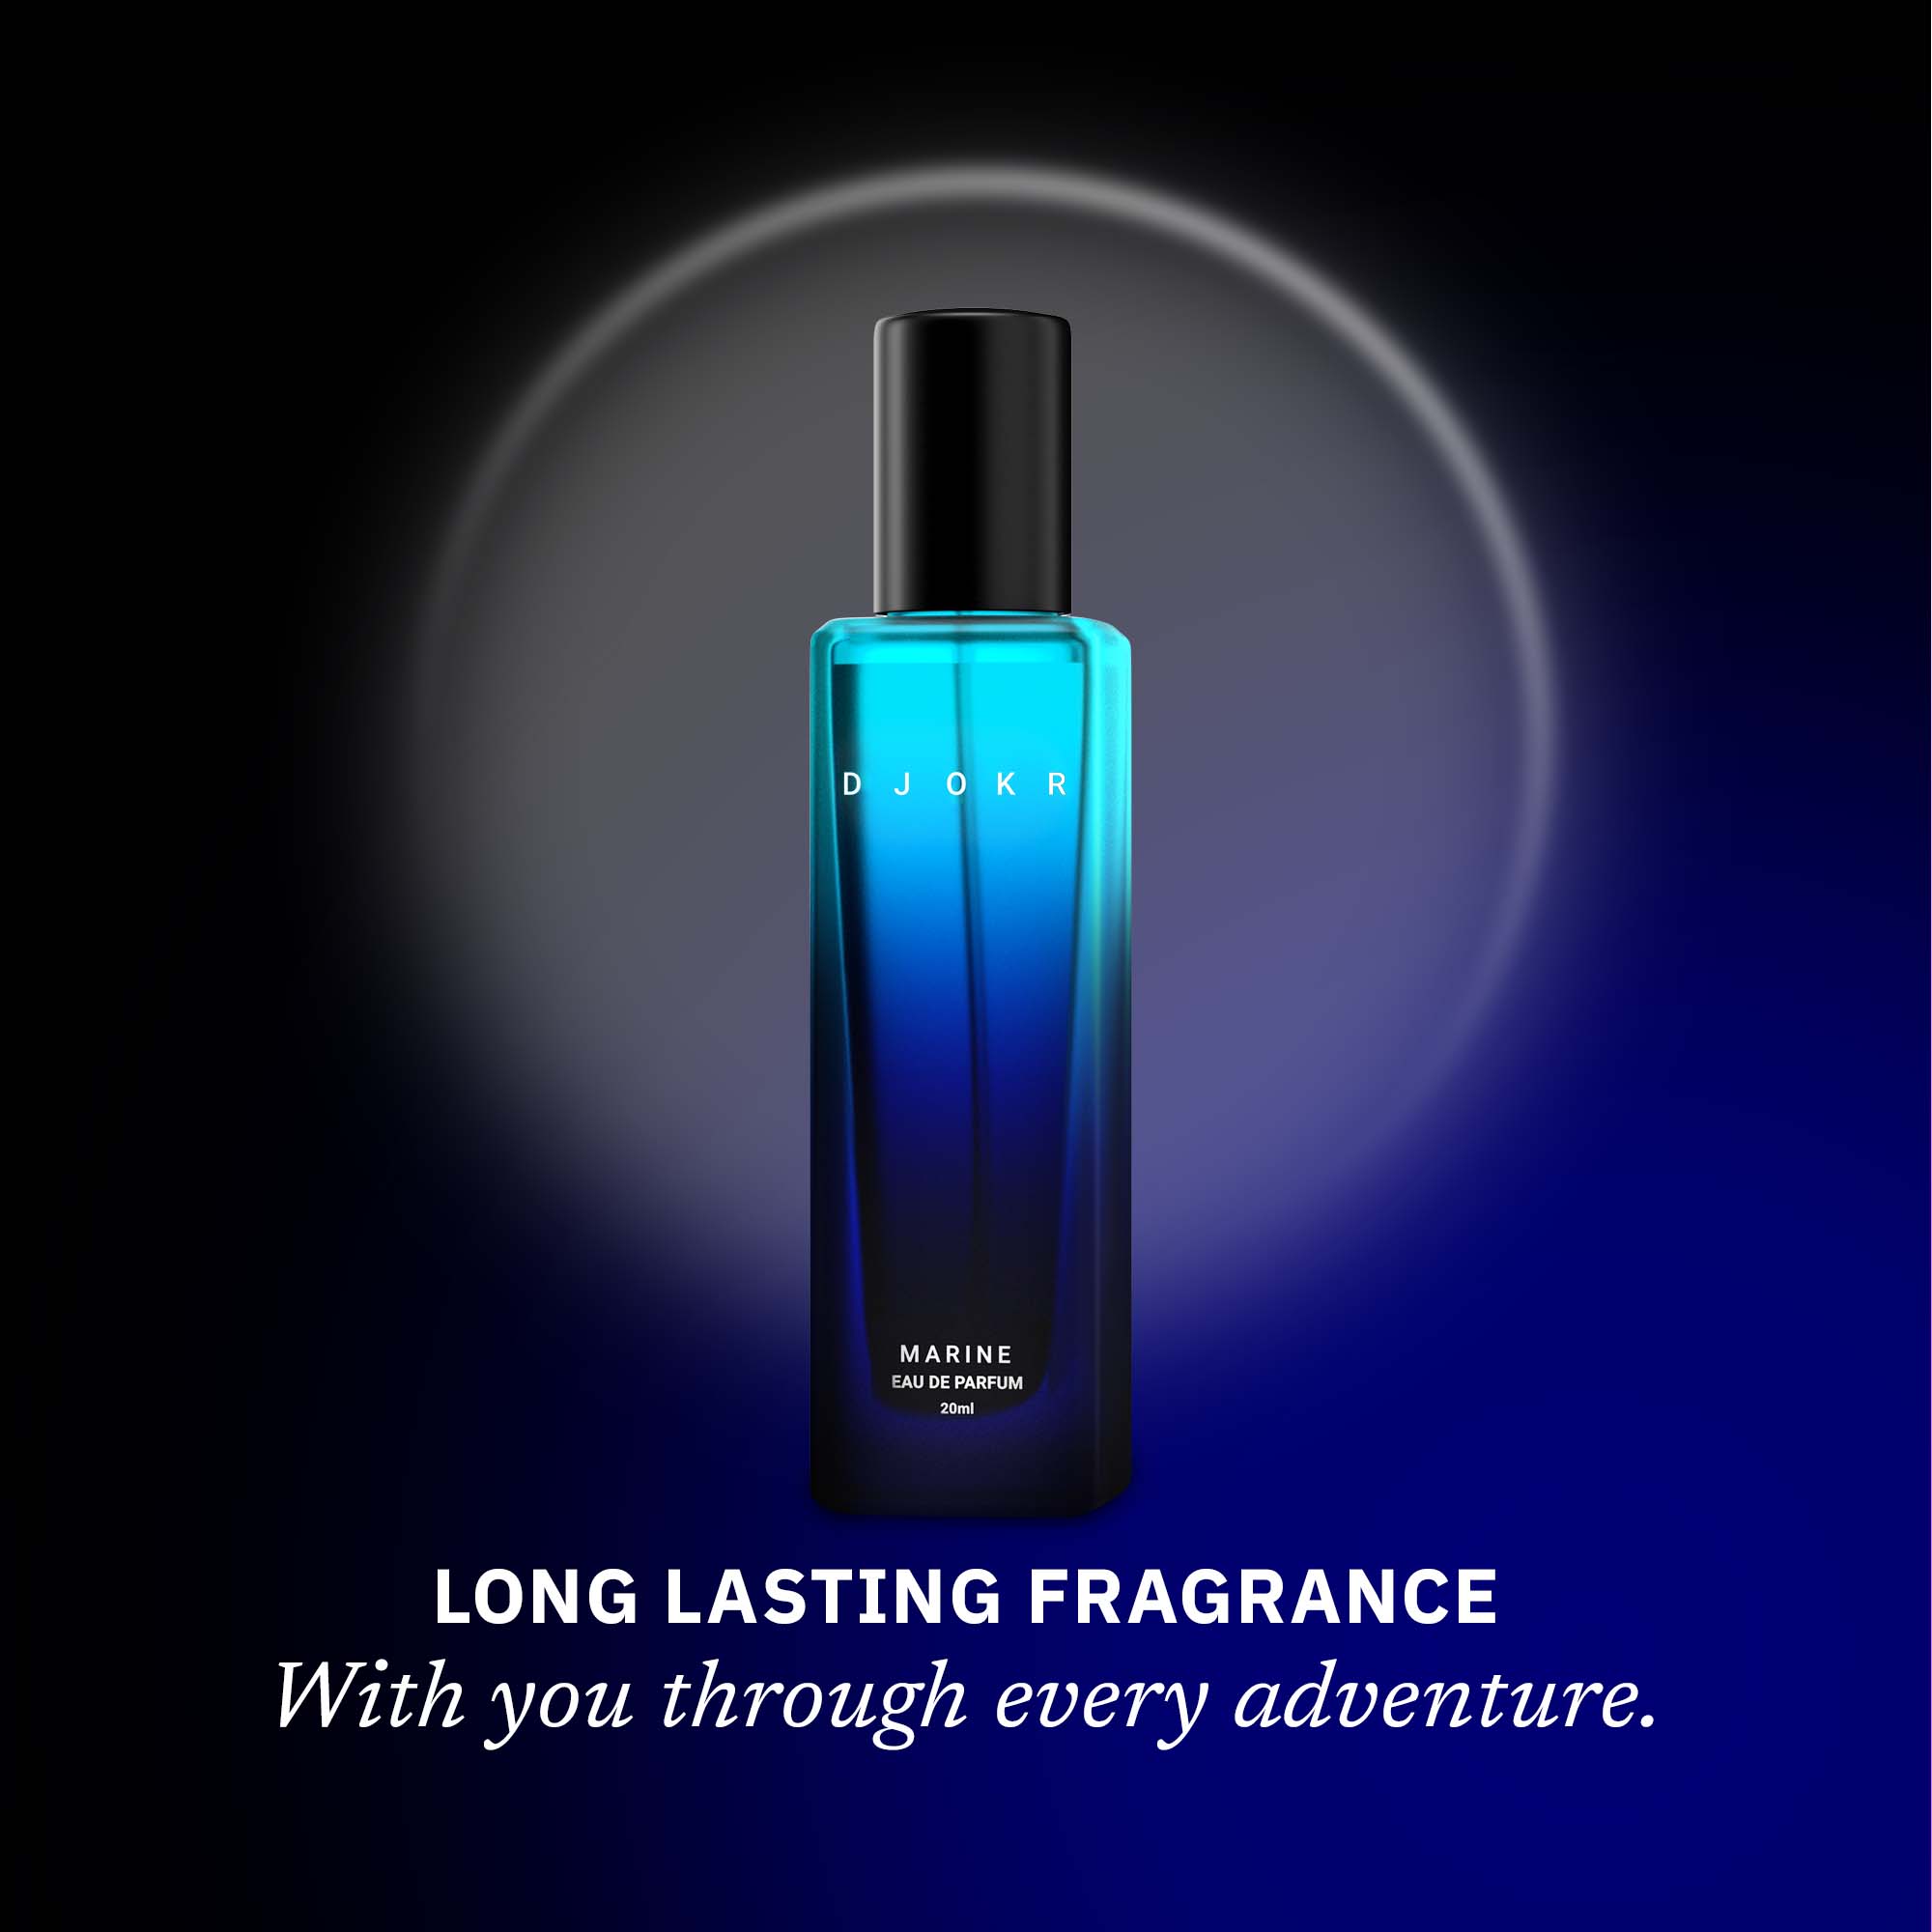 135ml- Layer Wottagirl Adore Perfume Spray in Ahmedabad at best price by  Adjavis Venture Limited - Justdial